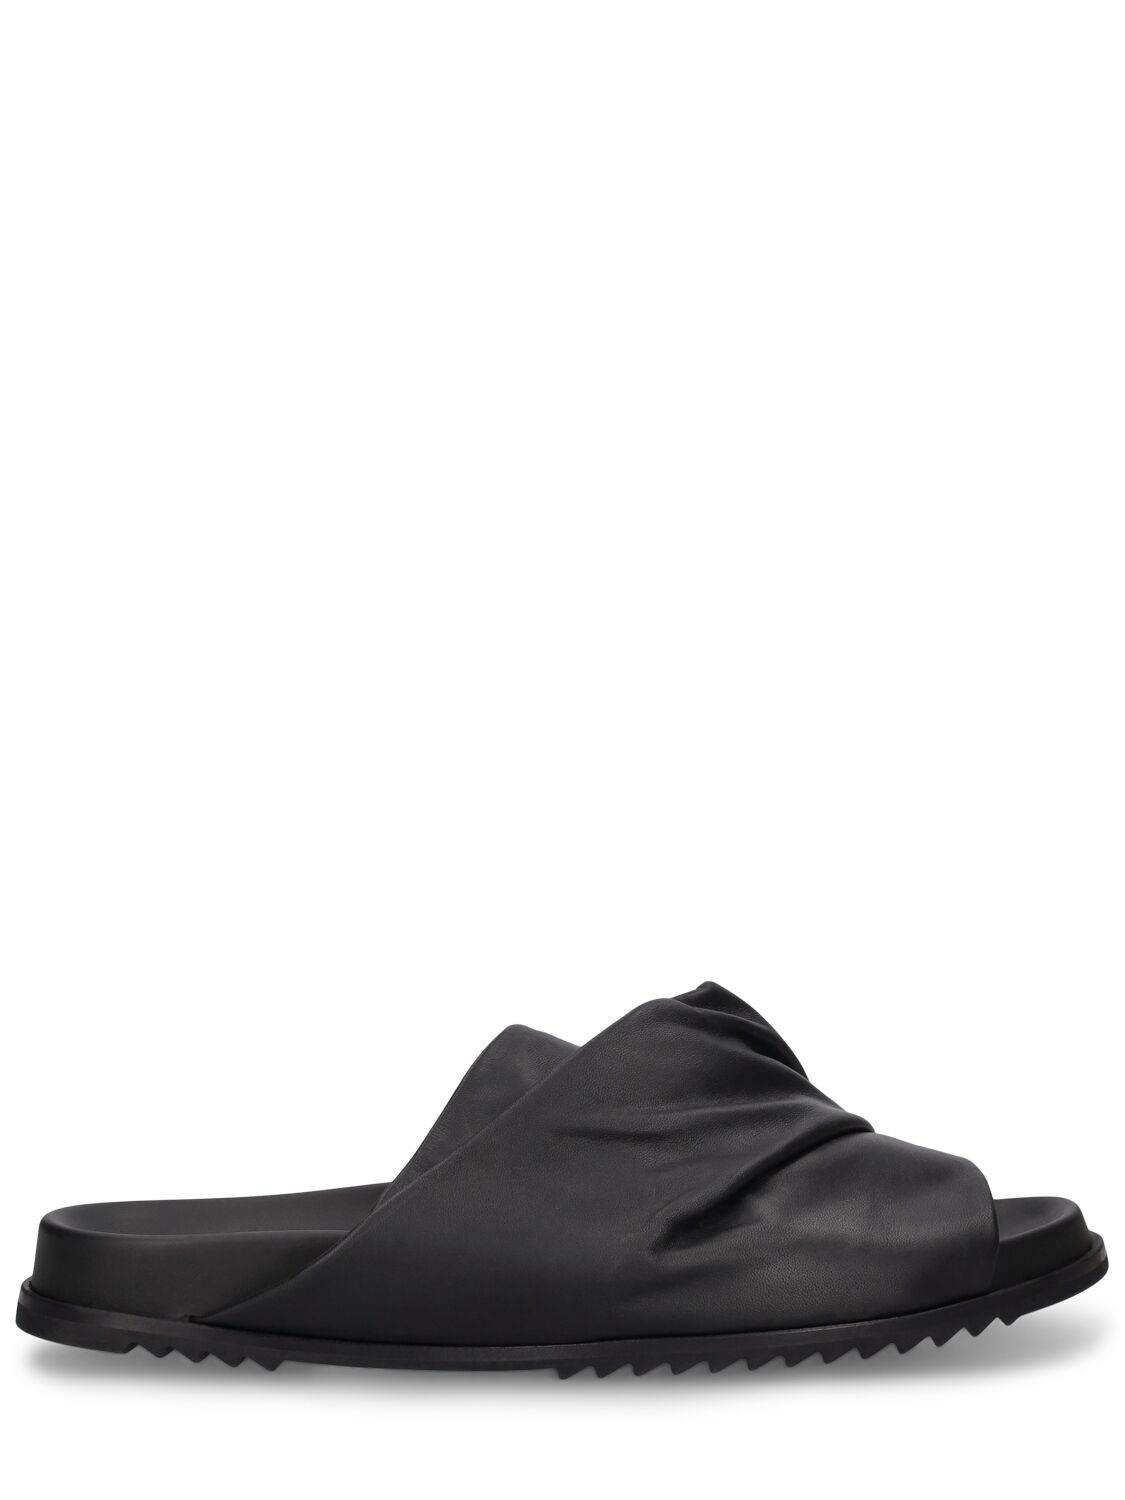 Rick Owens Mobious Granola Leather Sandals In Black